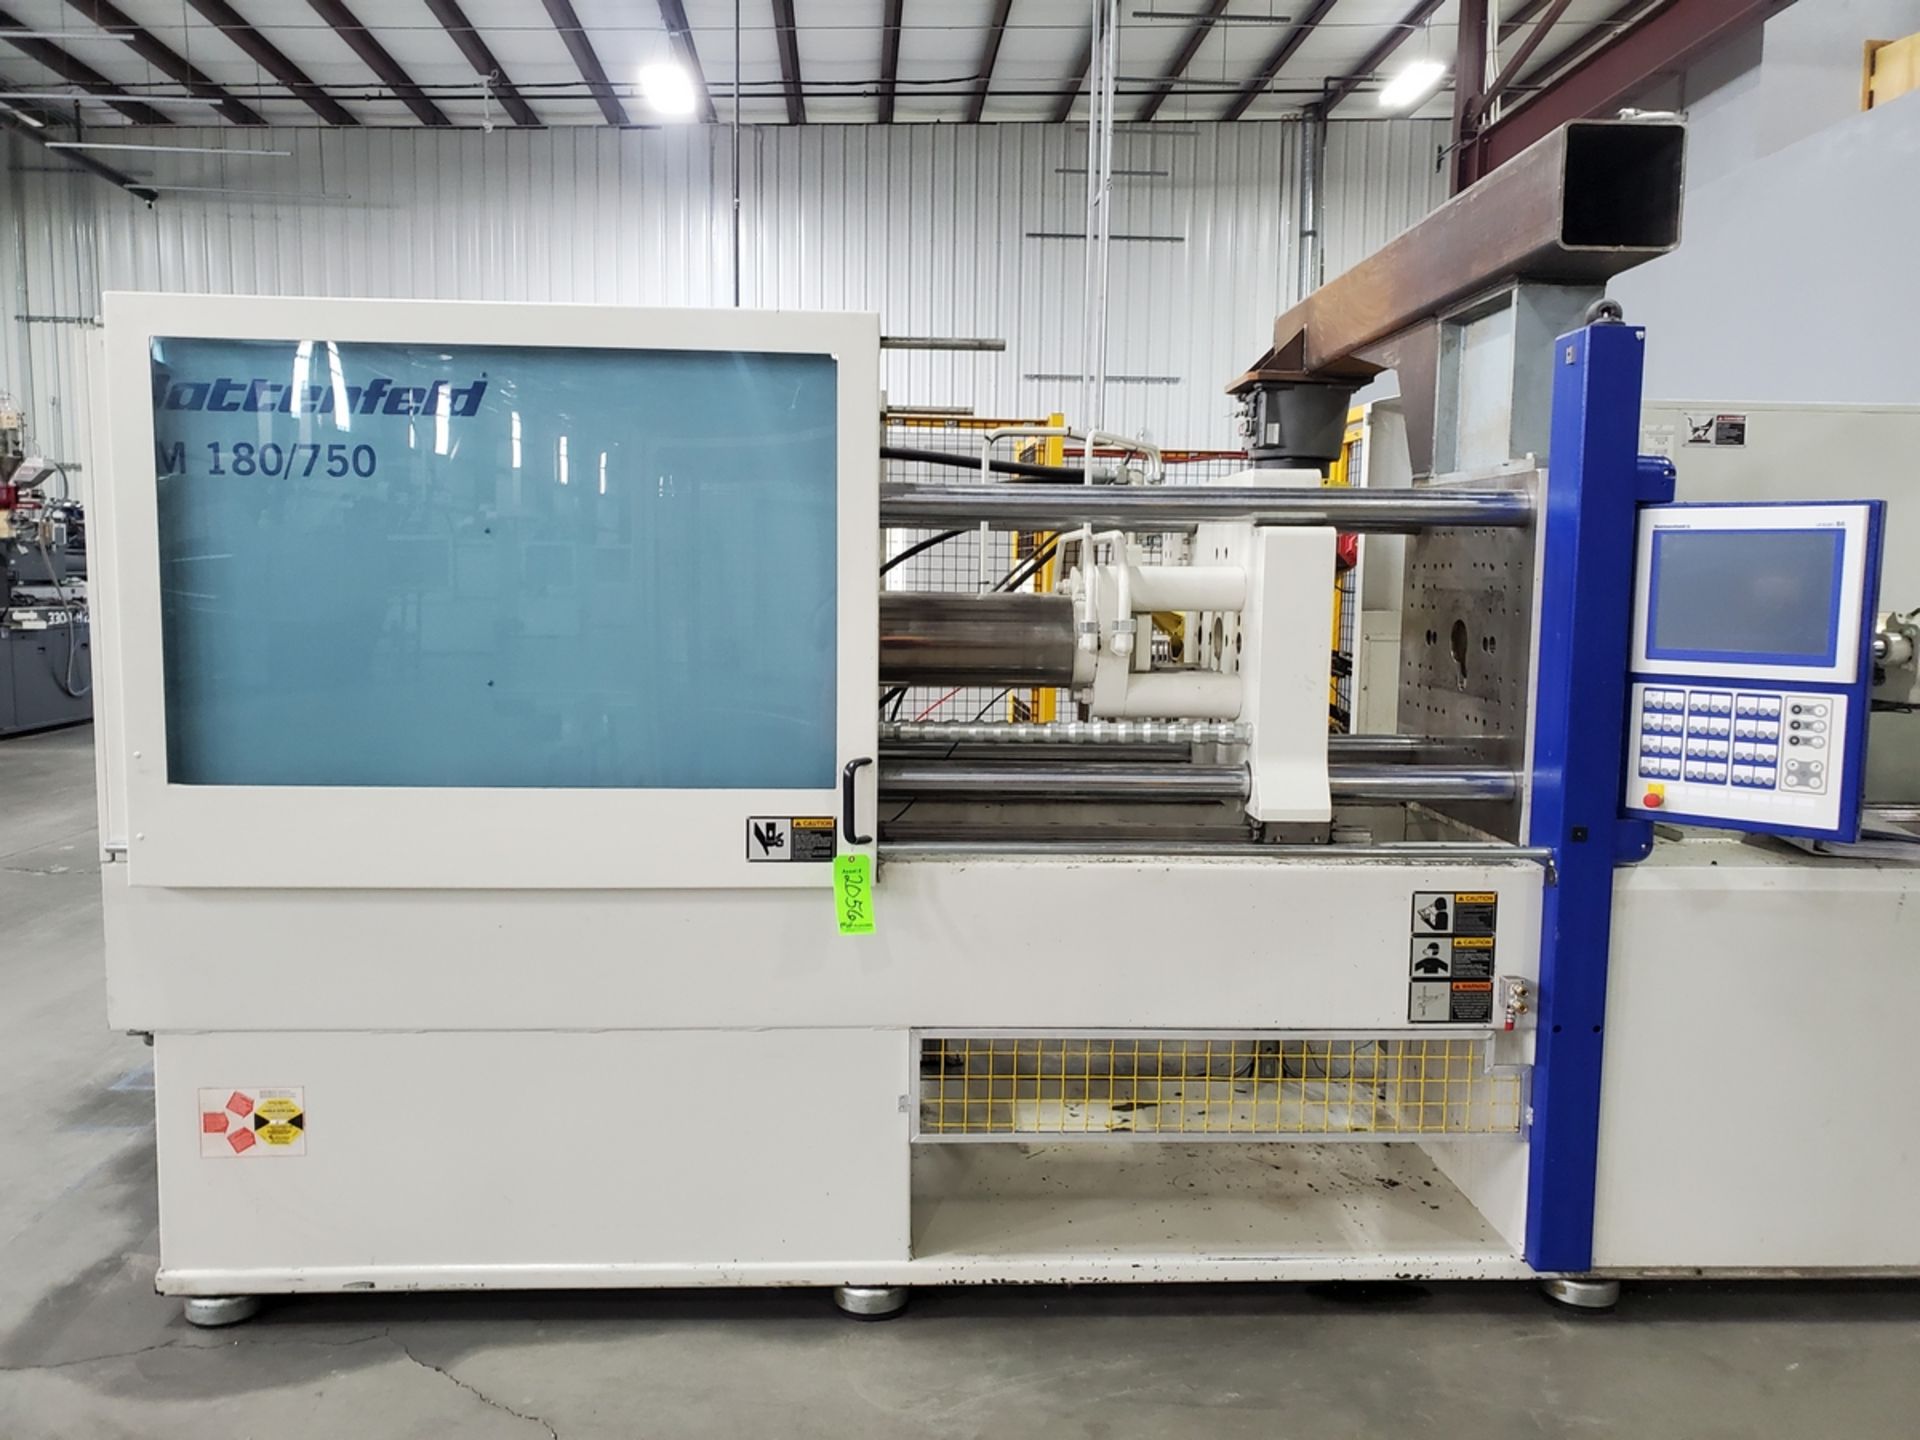 Battenfeld HM 180/750, 180 Ton Injection Molding Machine, New in 2013 - Image 2 of 12